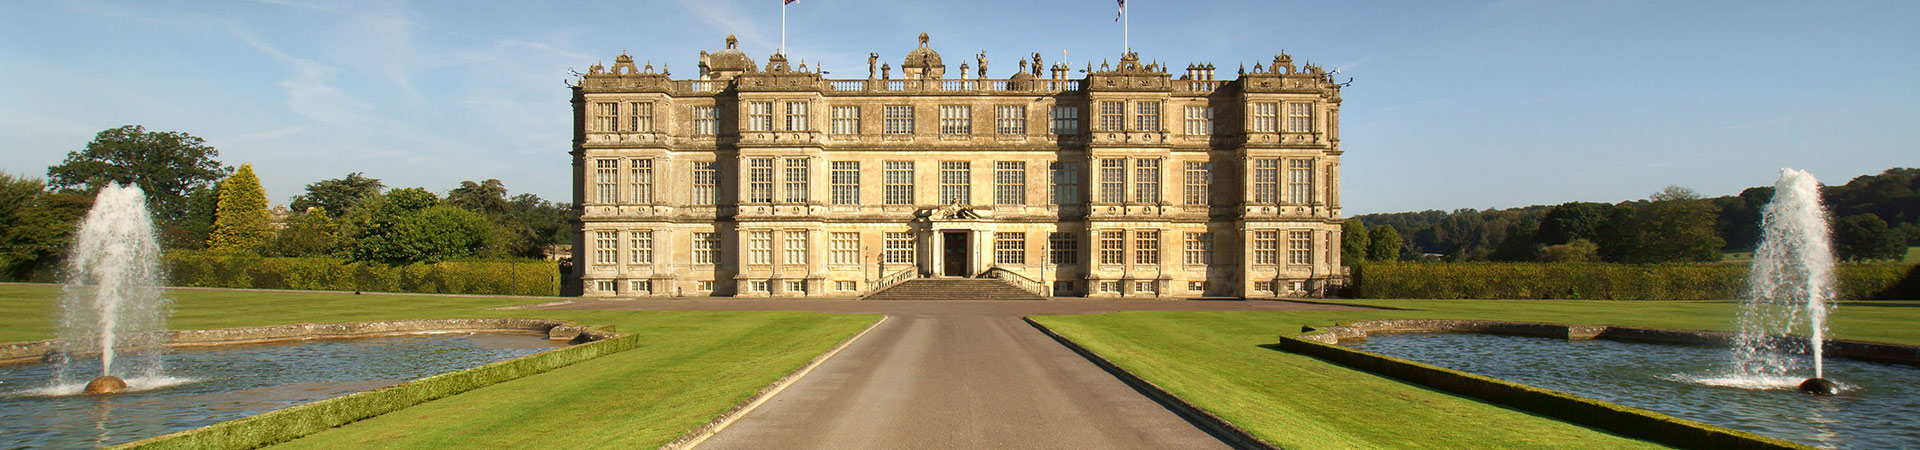 Longleat house and gardens